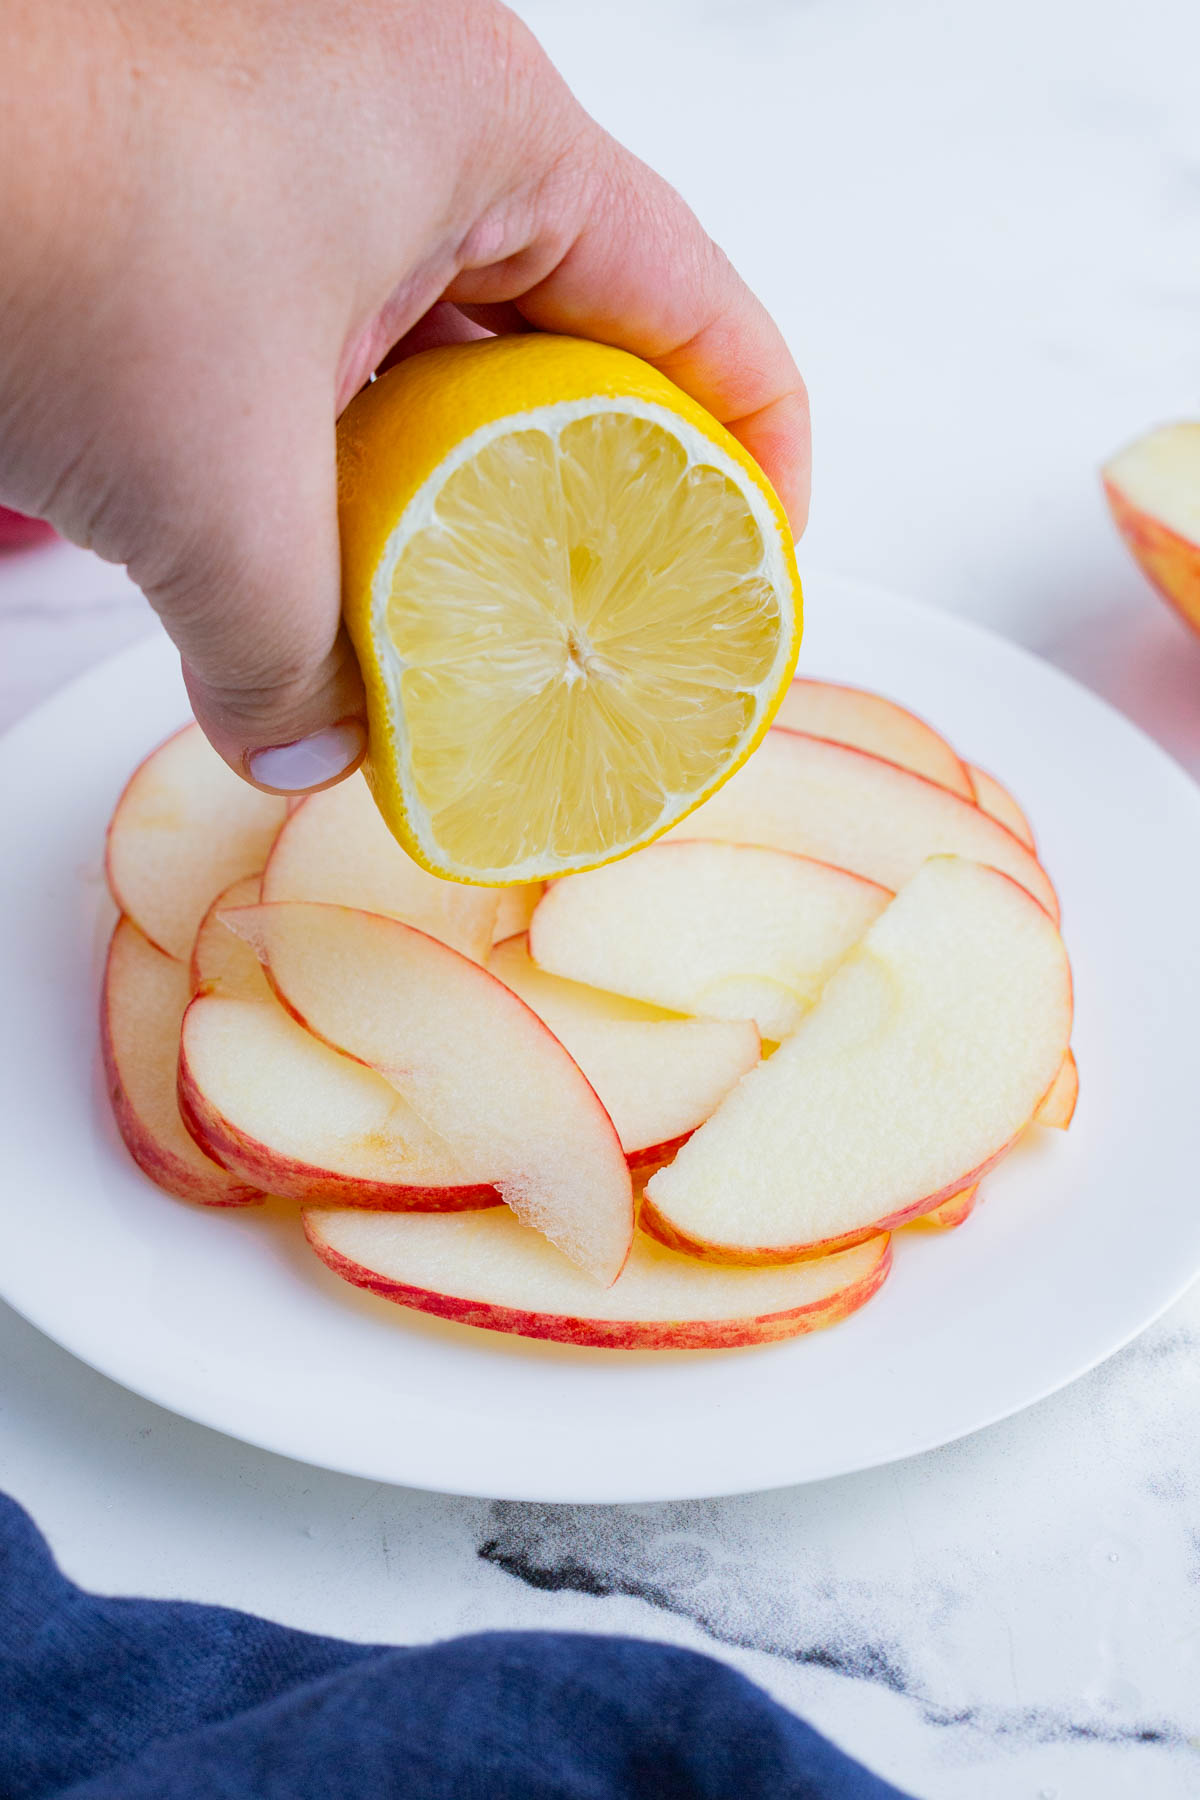 How to Prevent Apples From Browning